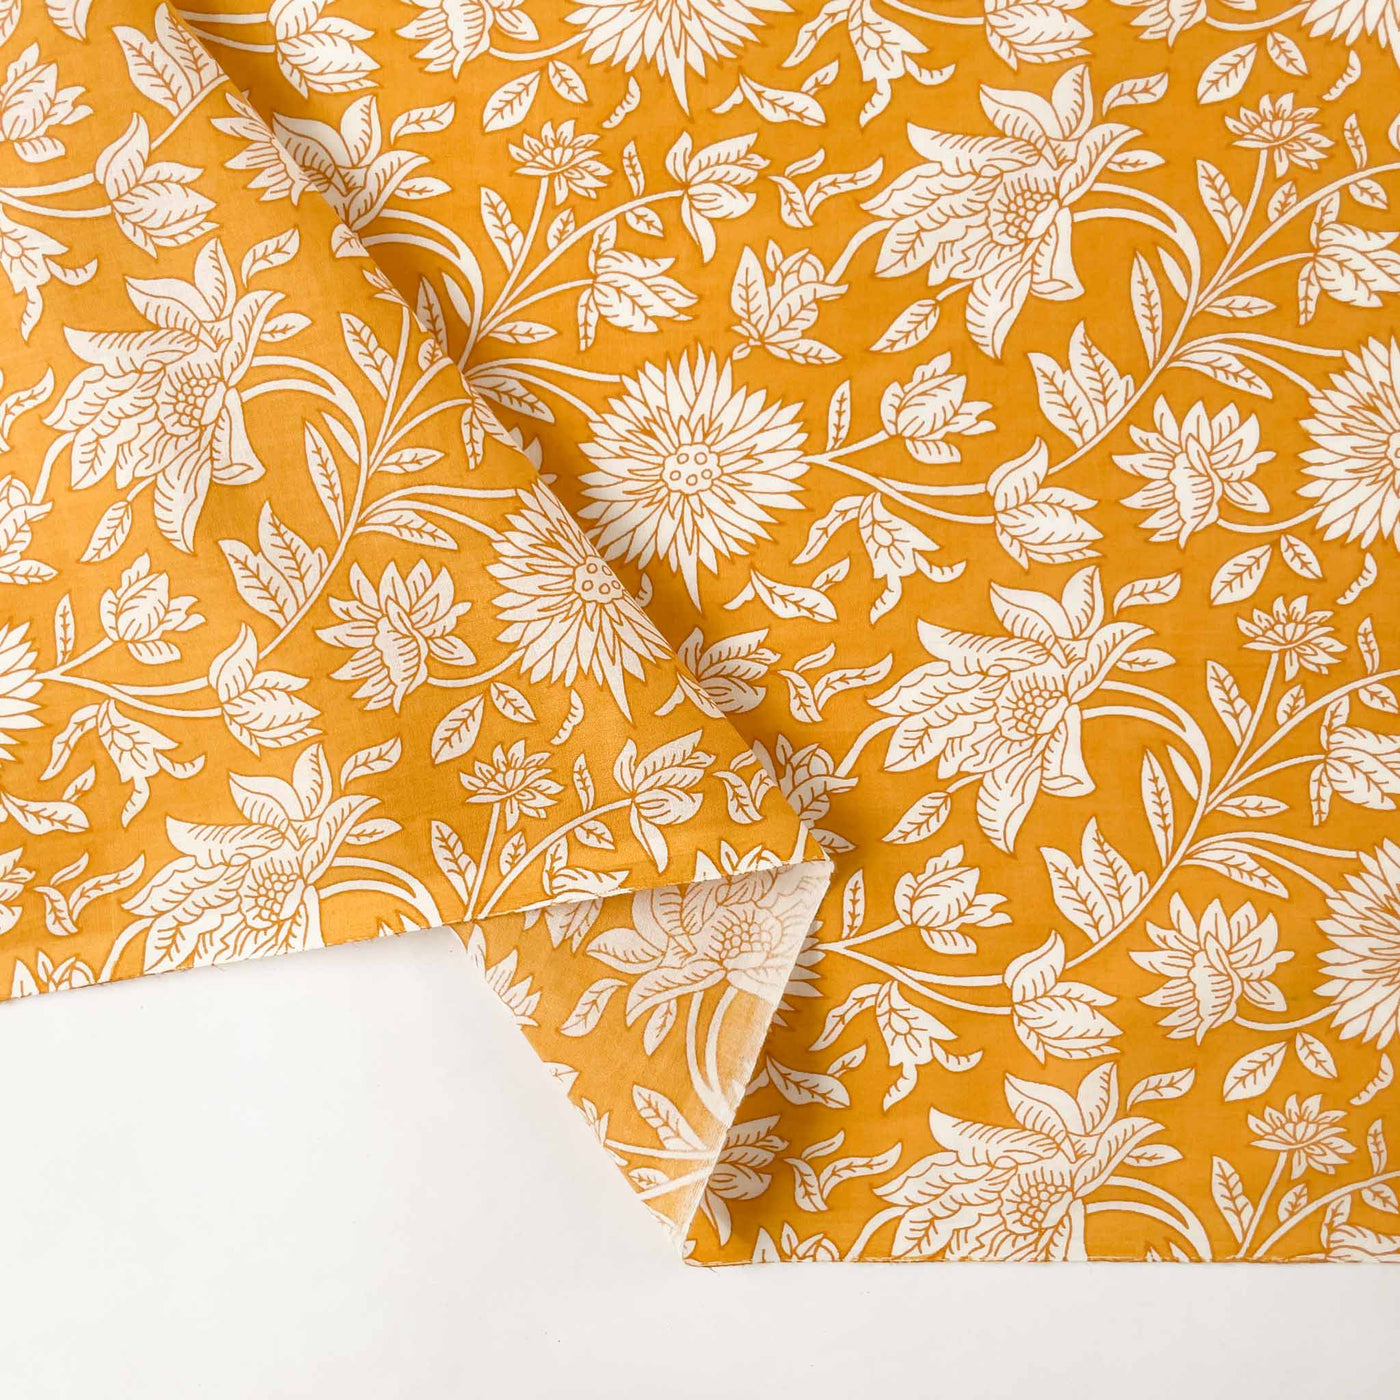 Fabric Pandit Fabric Mango Yellow & White Sunflowers and Lilies Screen Printed Pure Cotton Fabric (Width 43 inches)